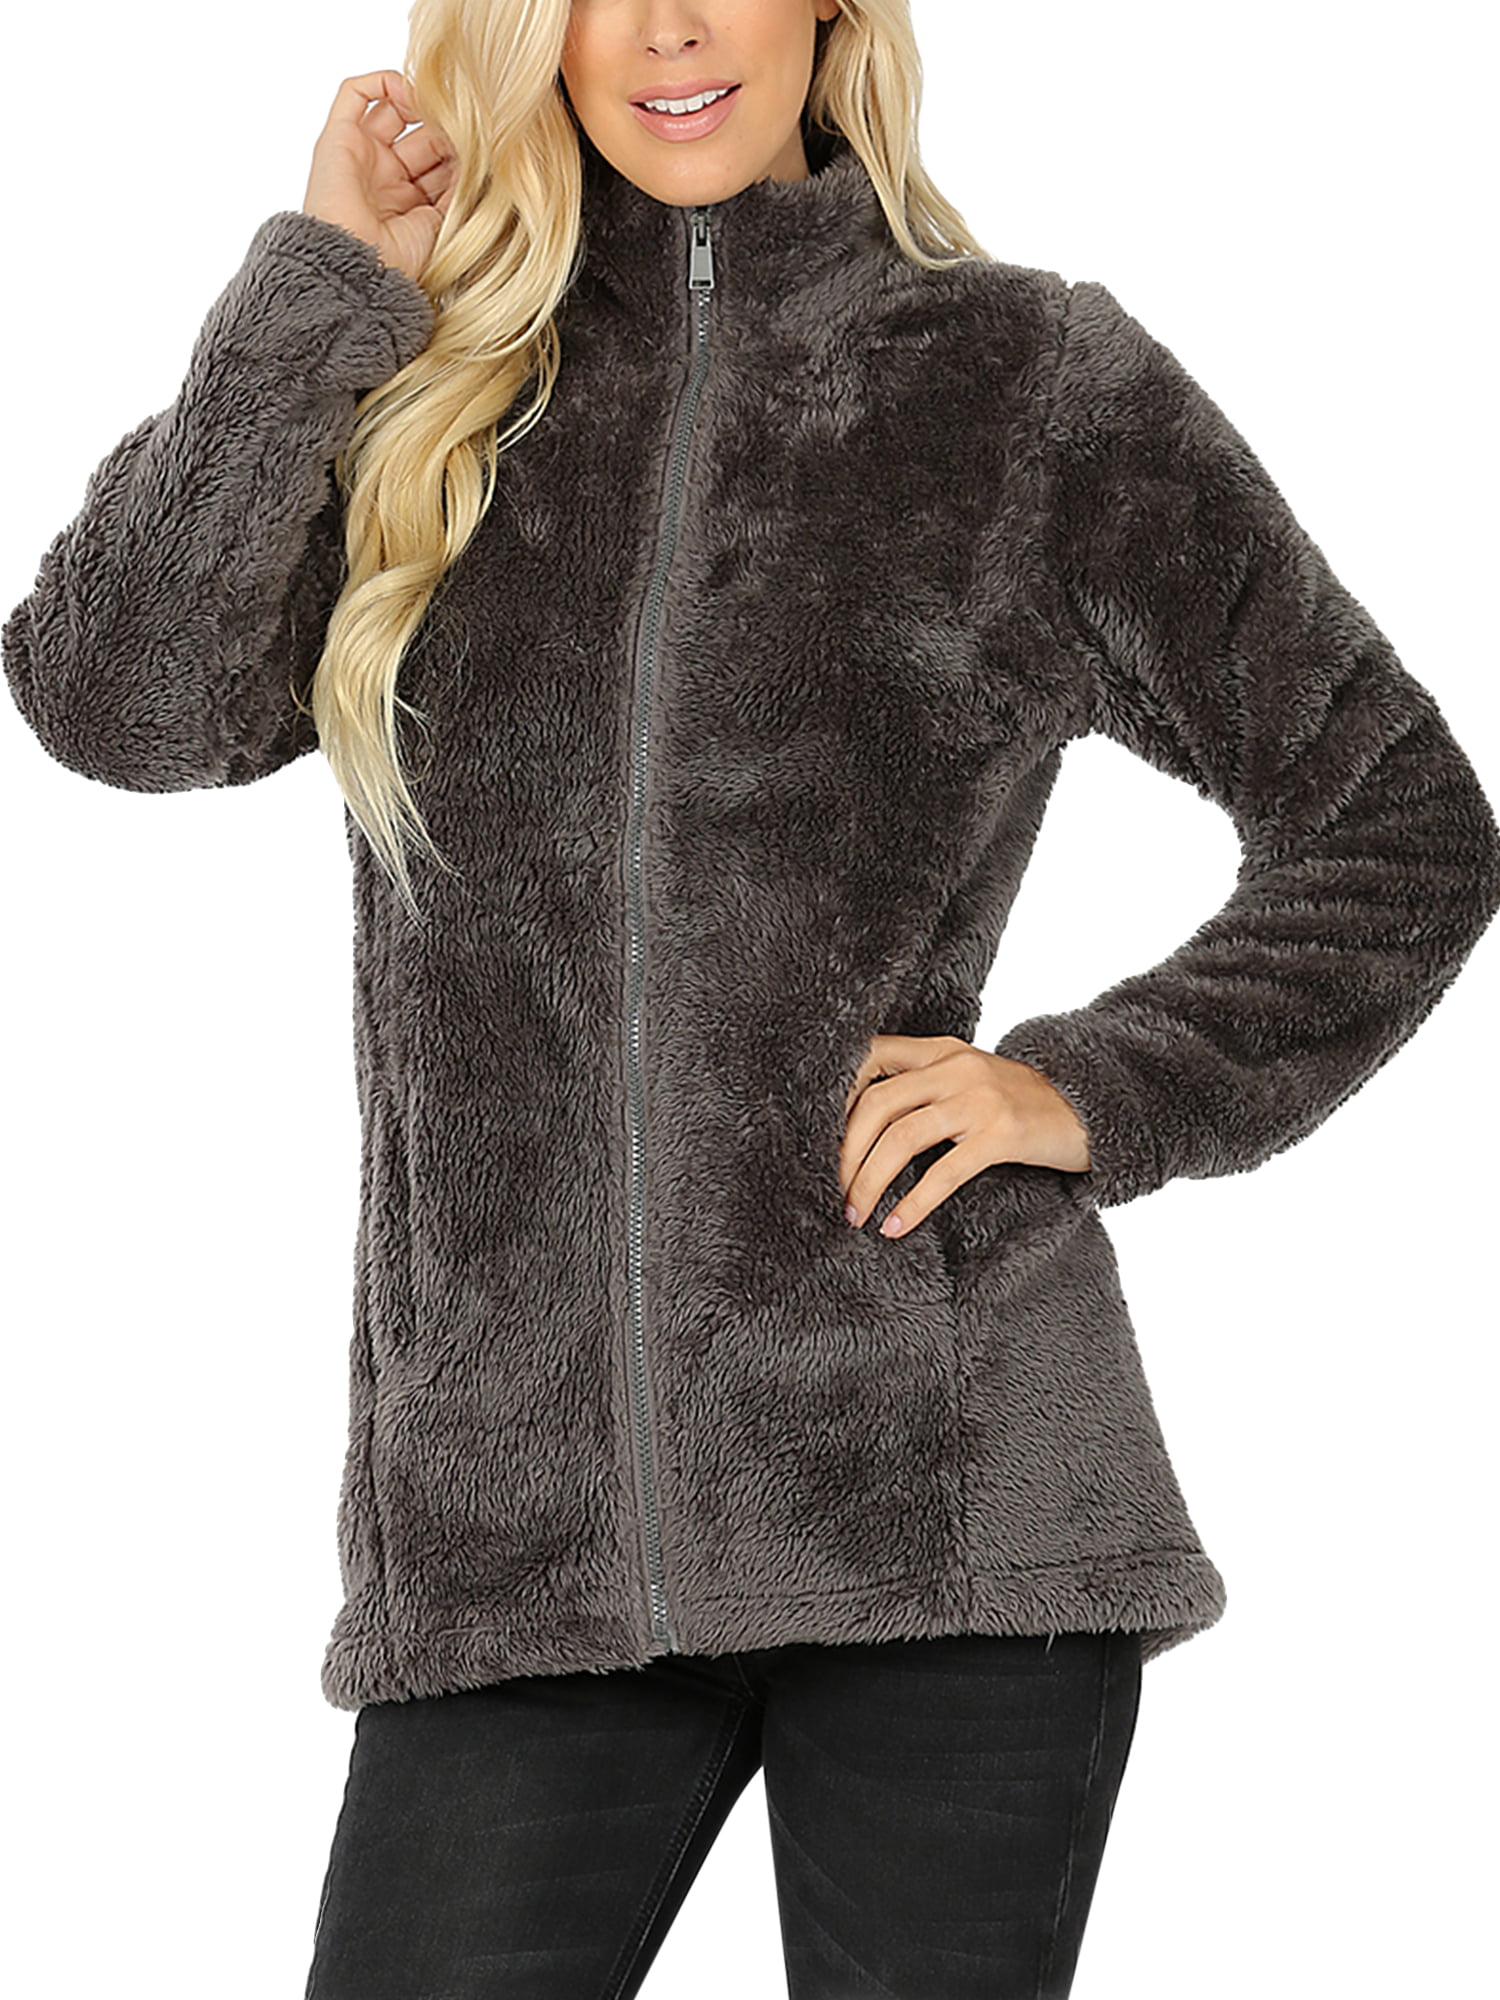 KOGMO - KOGMO Women's Soft Faux Fur Zip Up Jacket with Pockets Relaxed ...